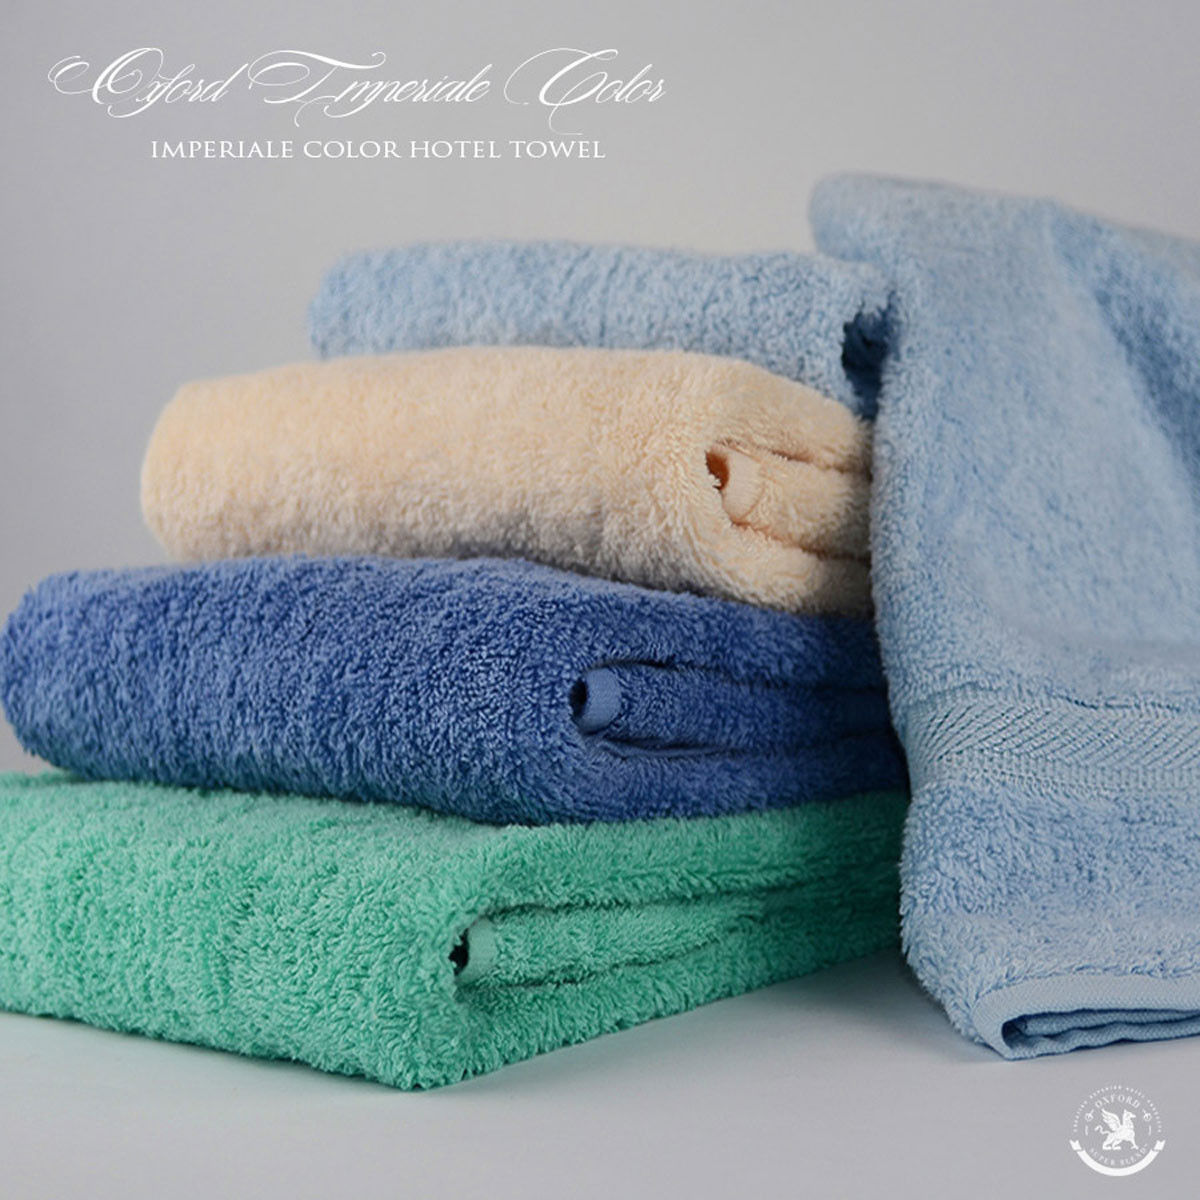 What's the way to feel the softness and texture of Oxford Towels in Kashmir Green?